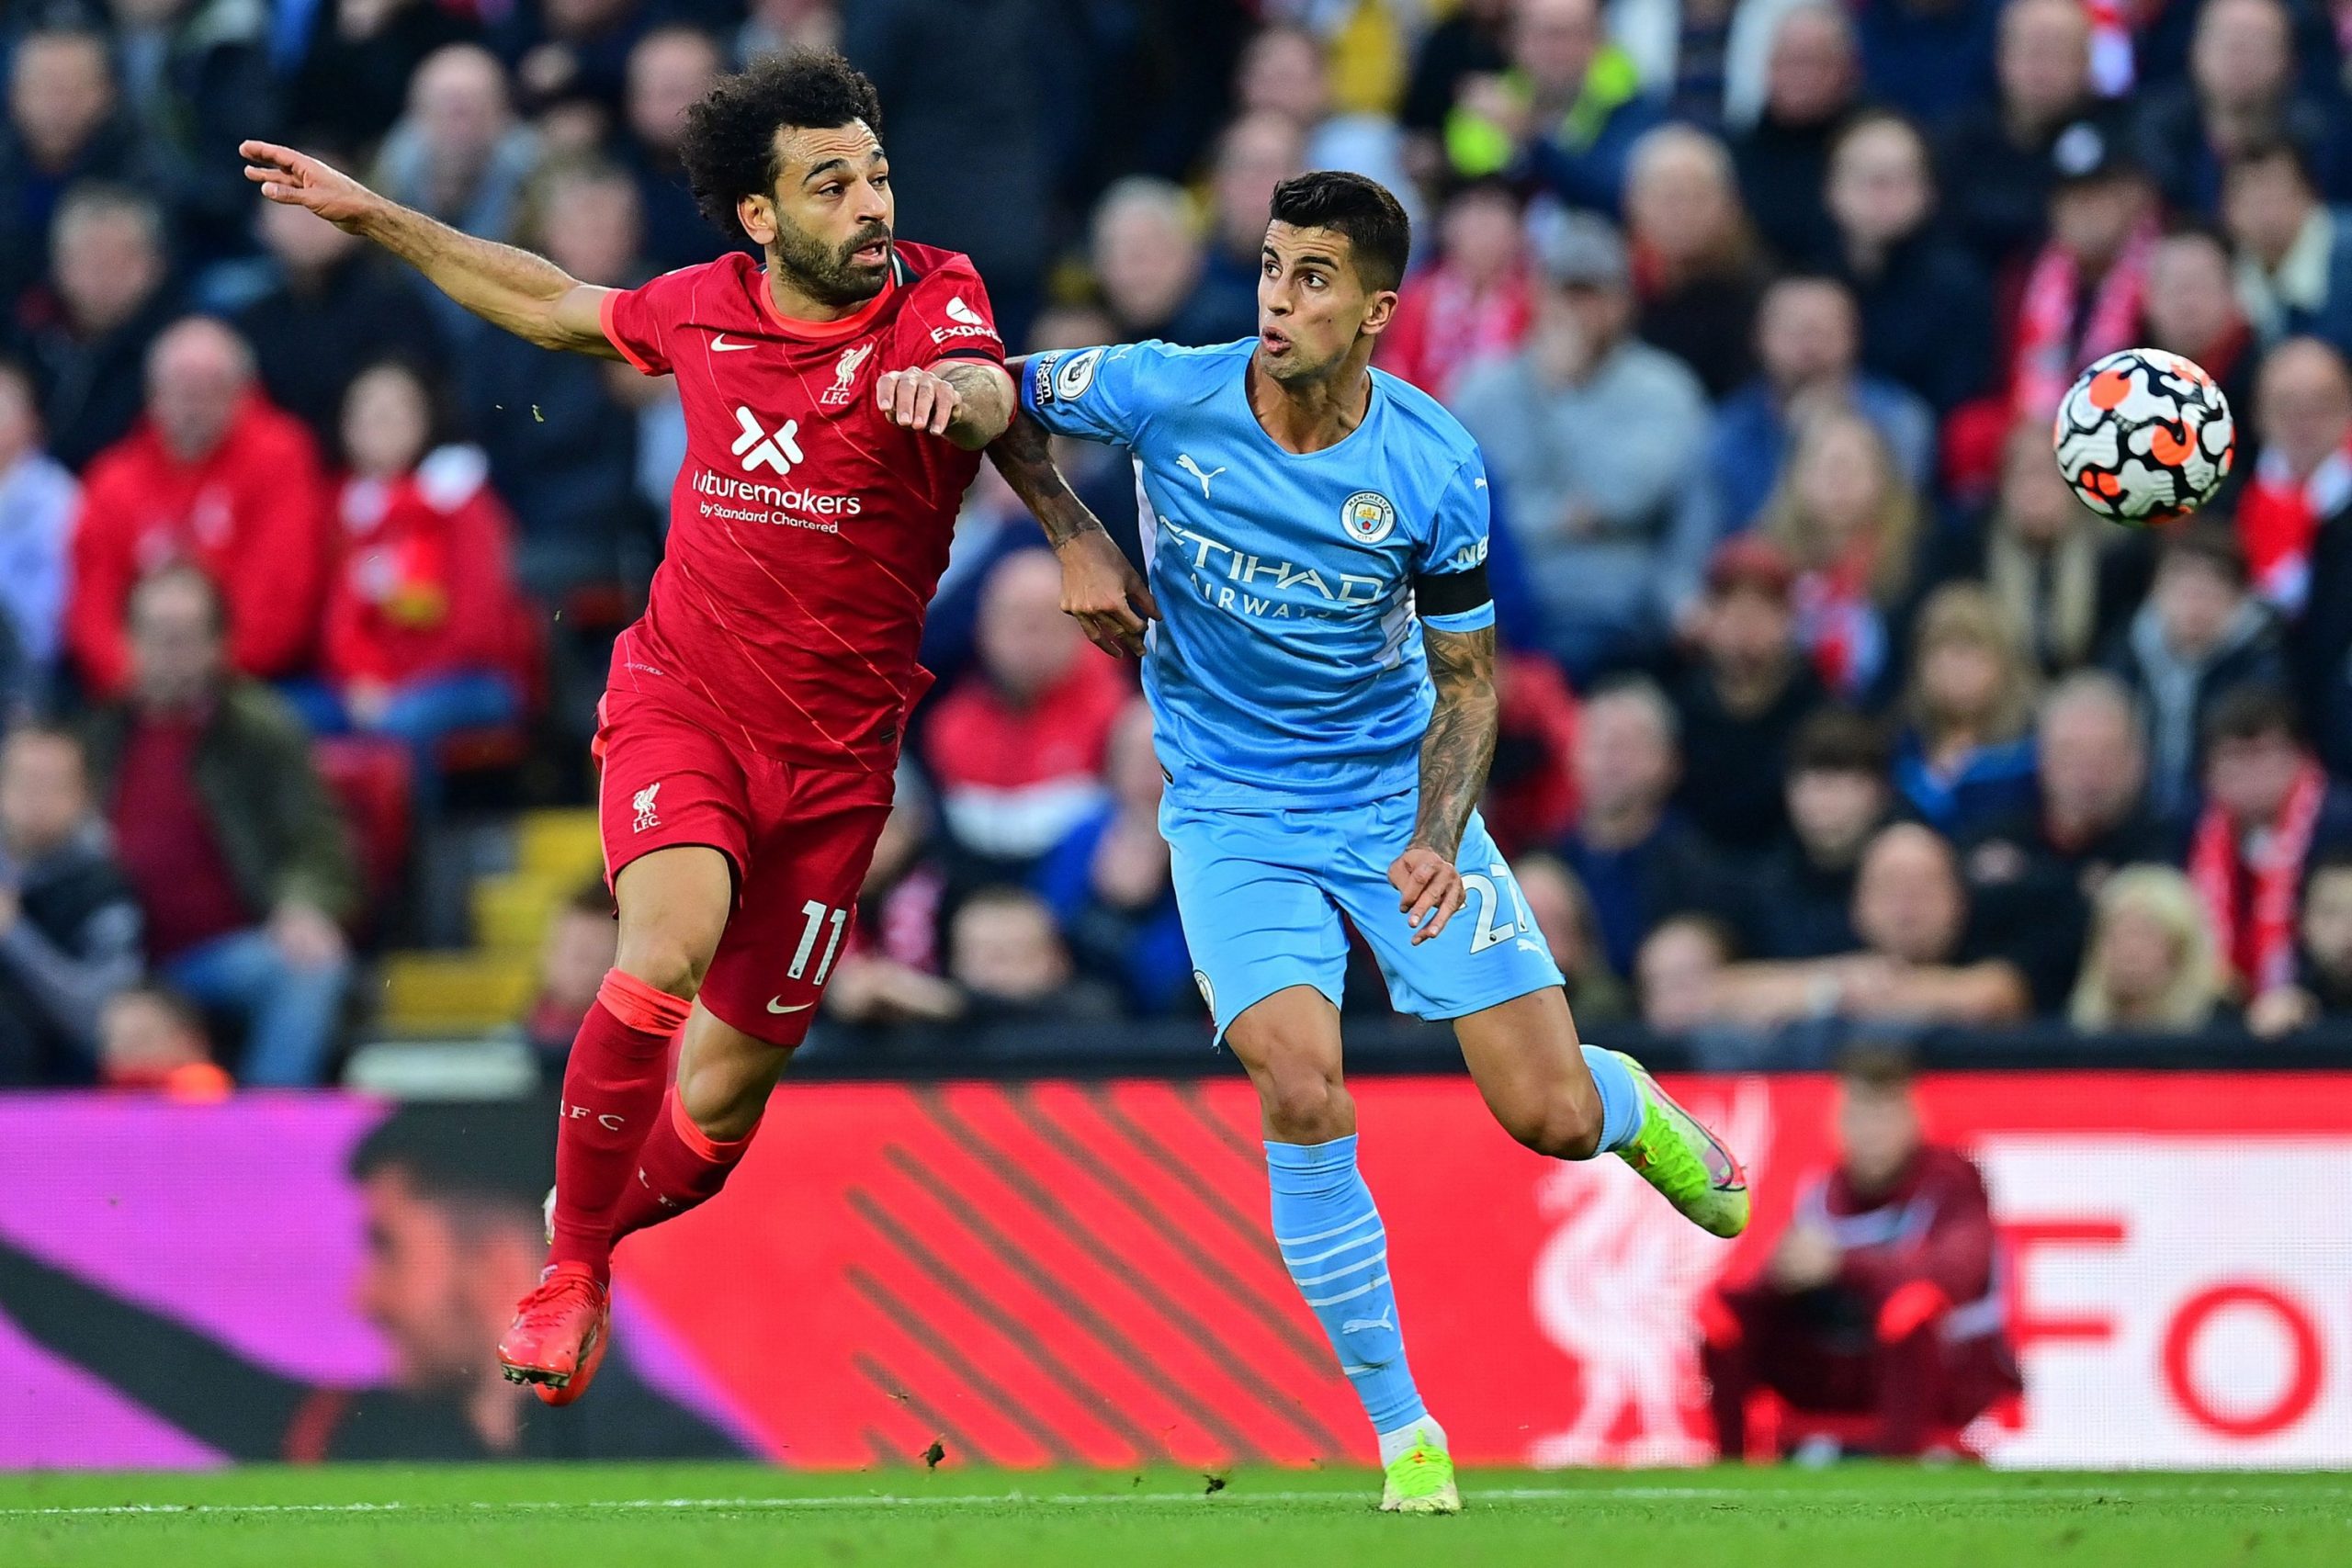 Manchester City fight back twice in thrilling 2-2 draw at Liverpool